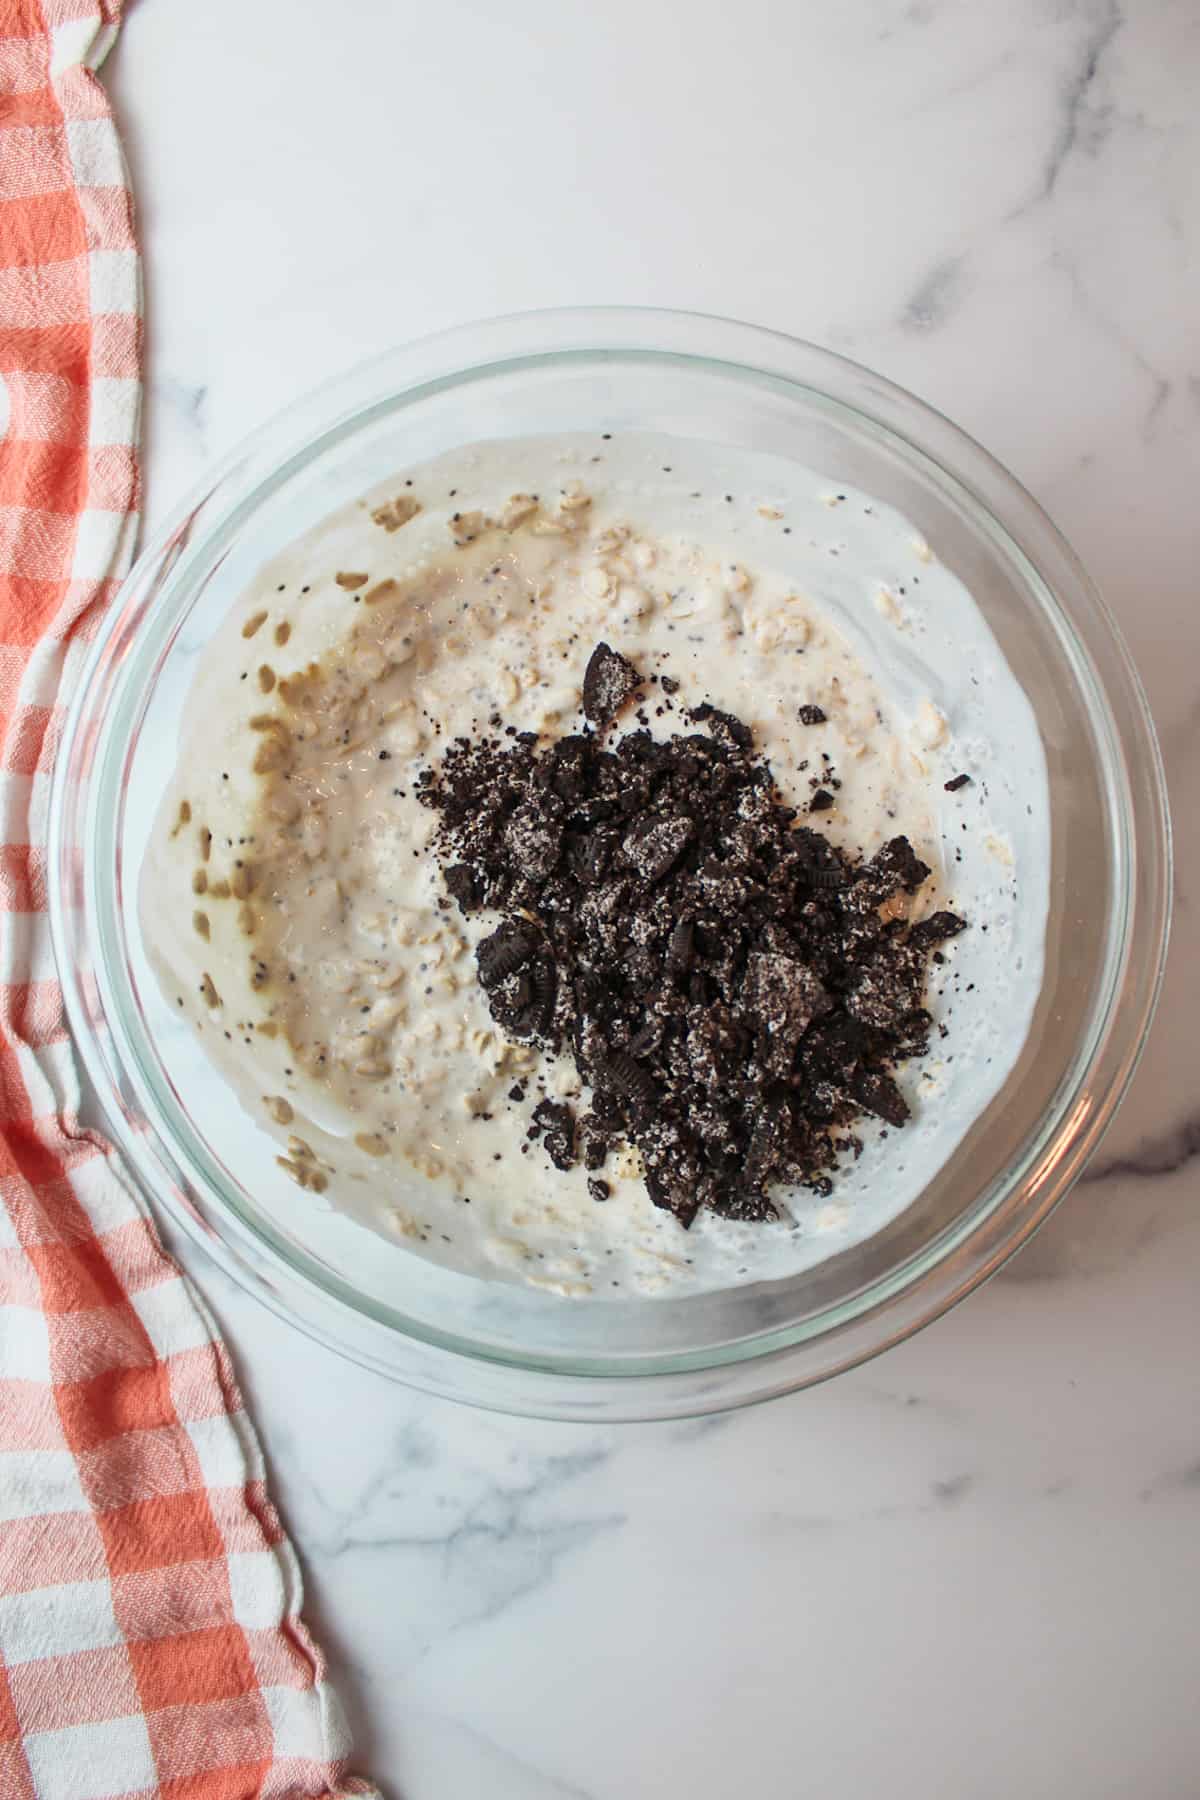 crushed oreos in a mixing bowl with overnight oats mixture